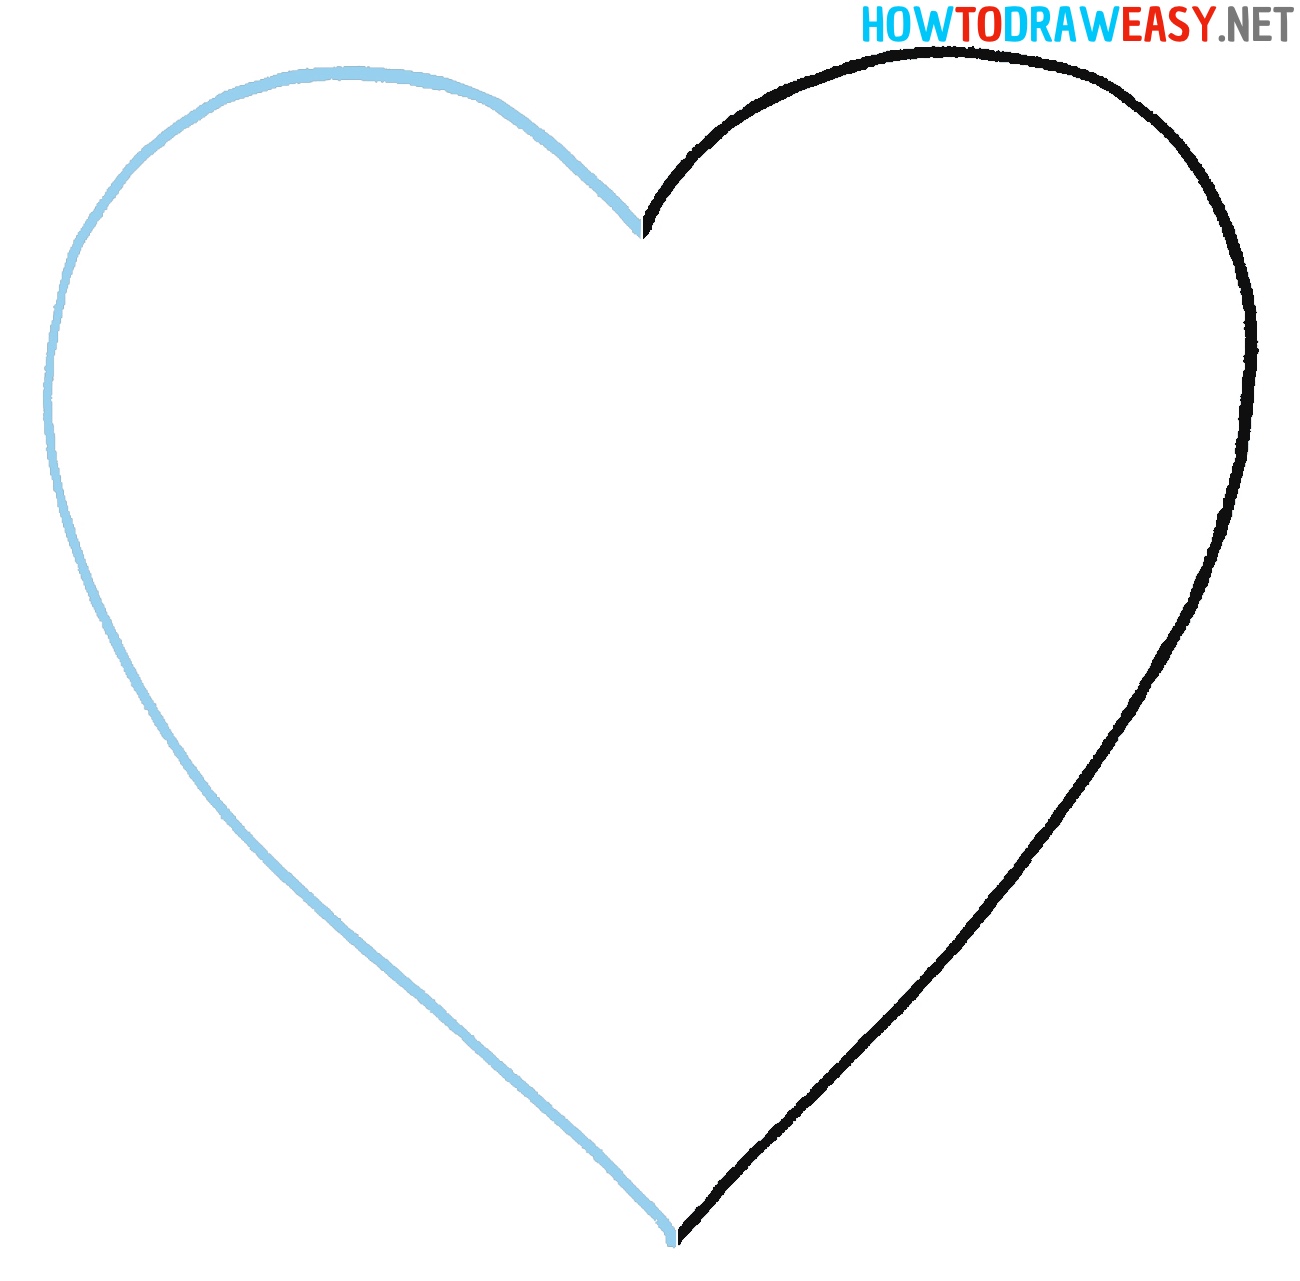 How to Draw an Easy Heart